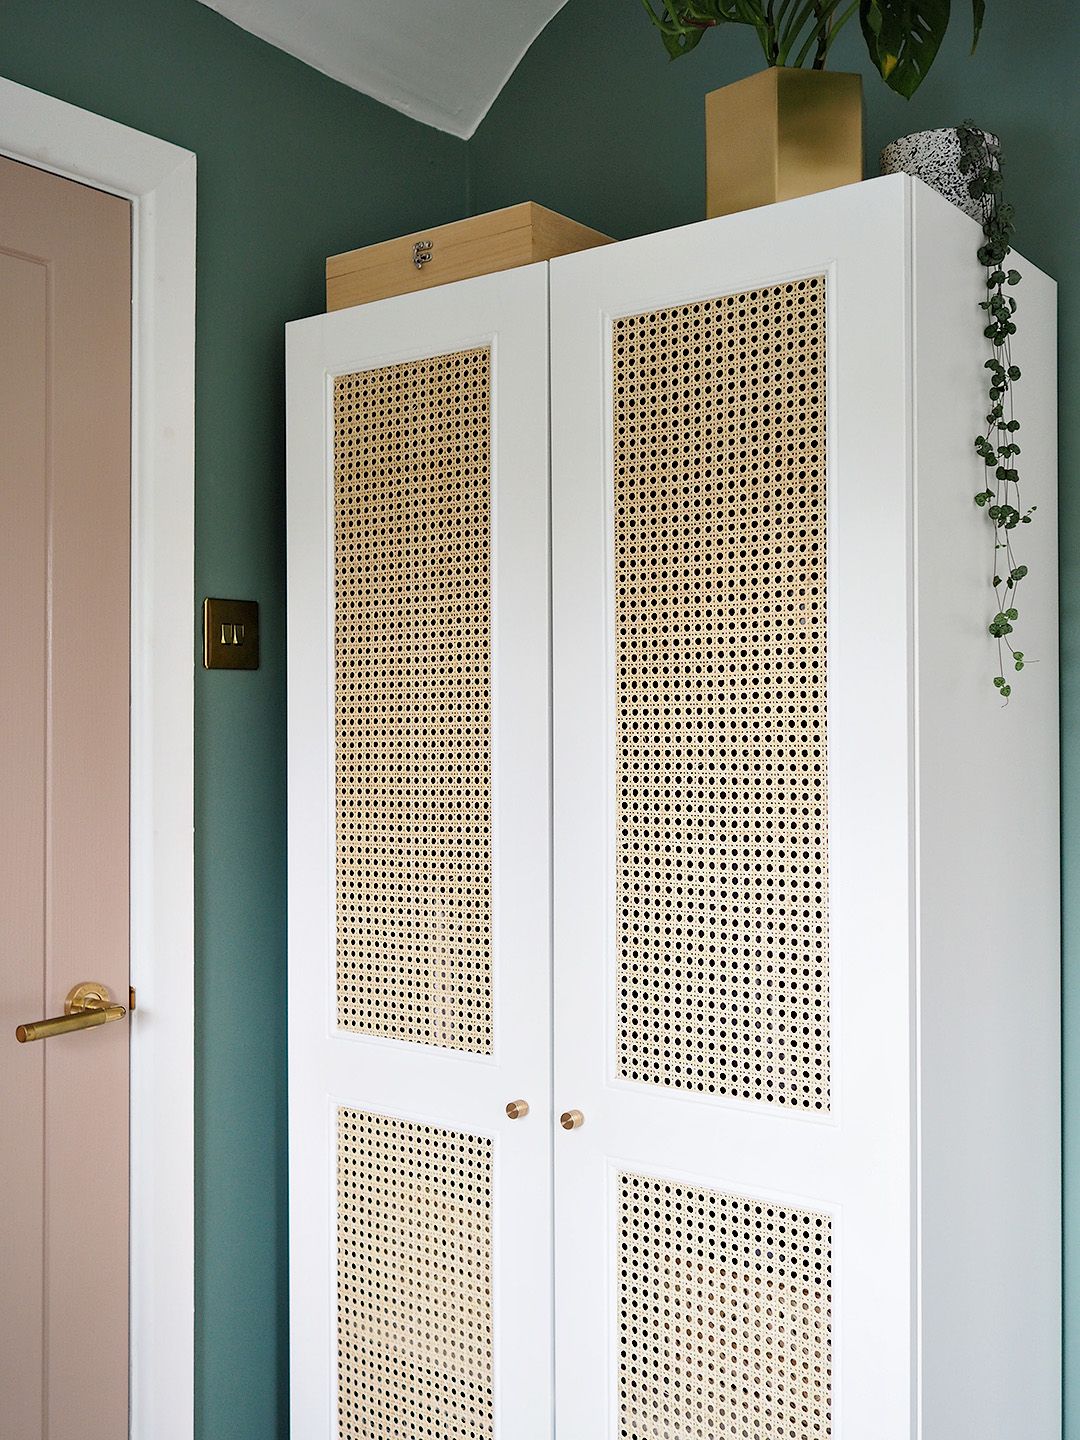 Rattan Cane Ikea Wardrobe Diy Hack For Under £170 | Lust Living With Regard To White Rattan Wardrobes (View 6 of 20)